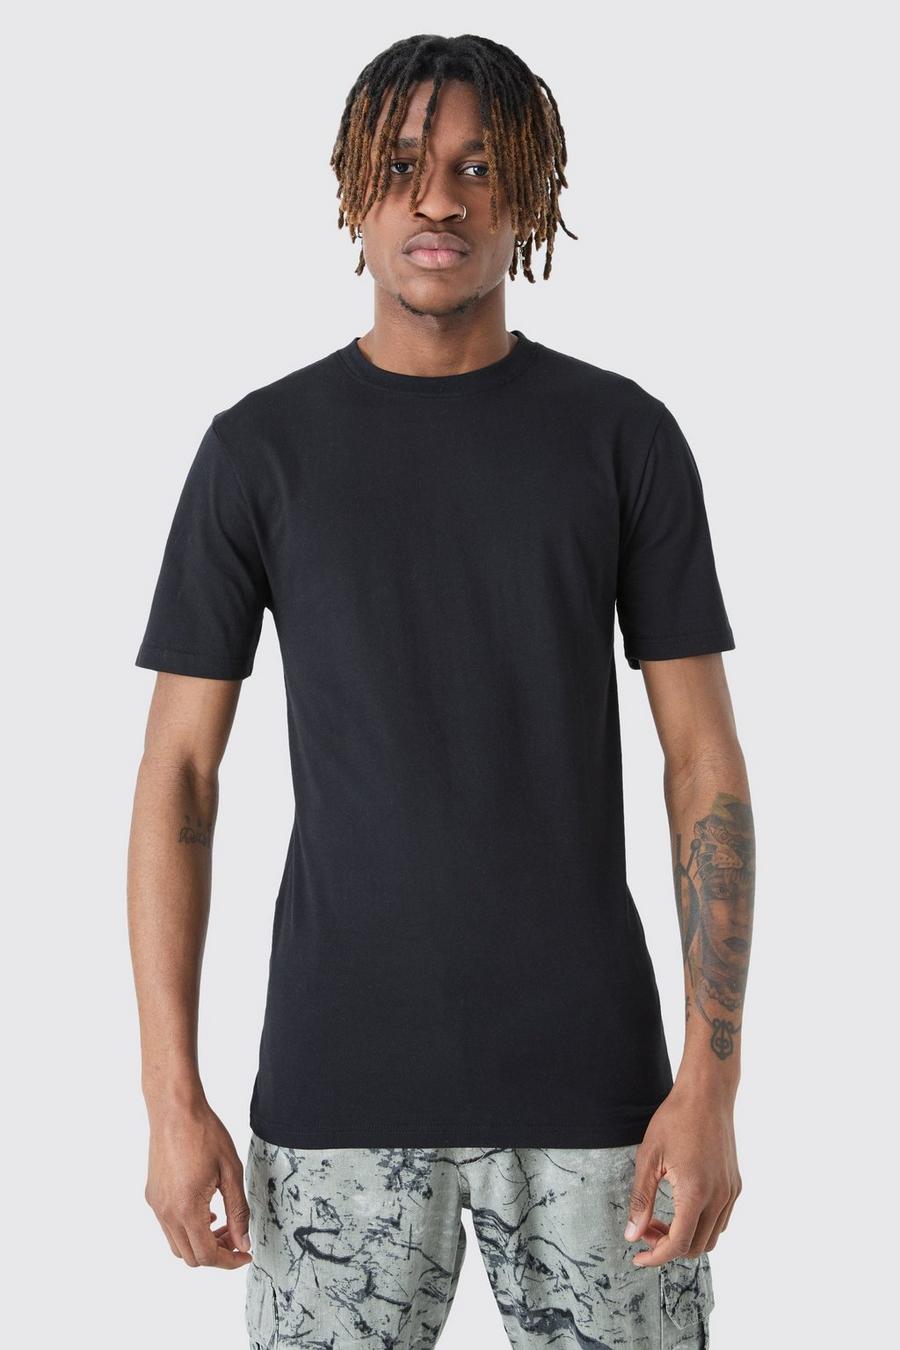 Black Tall Basic Muscle Fit T-shirt